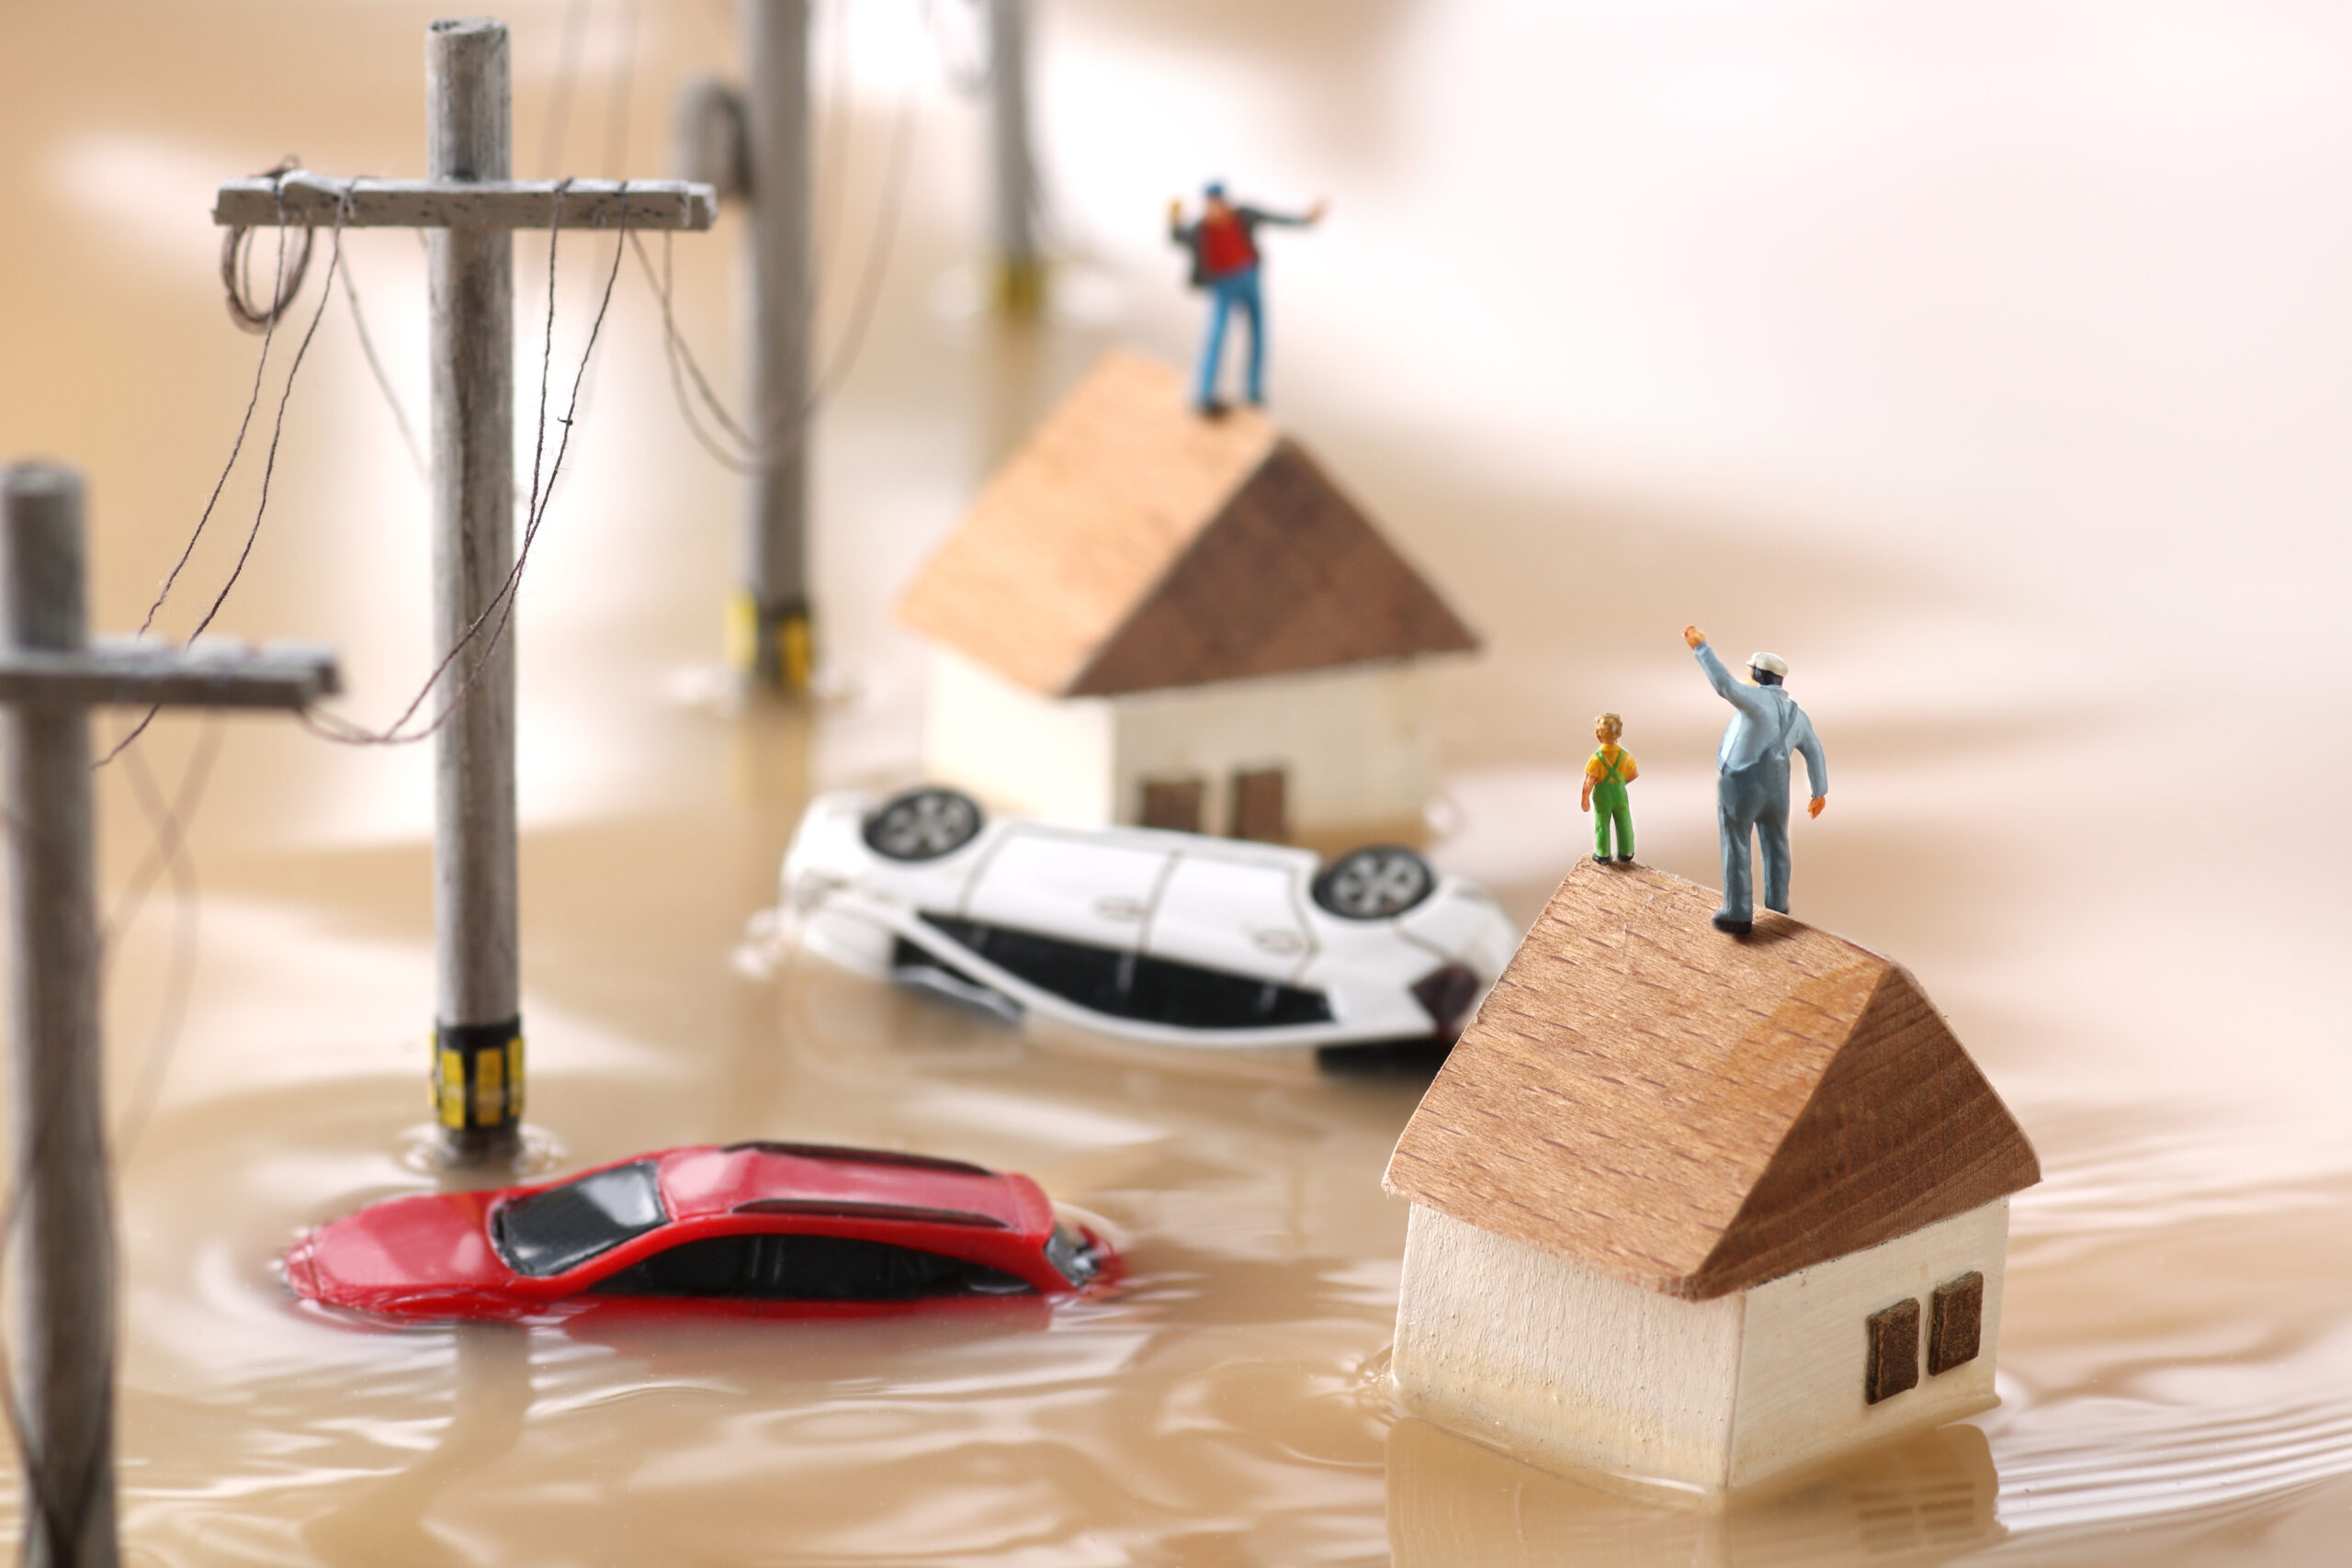 8 SWIFT ITEMS TO BUILD YOUR FLOOD EMERGENCY KIT